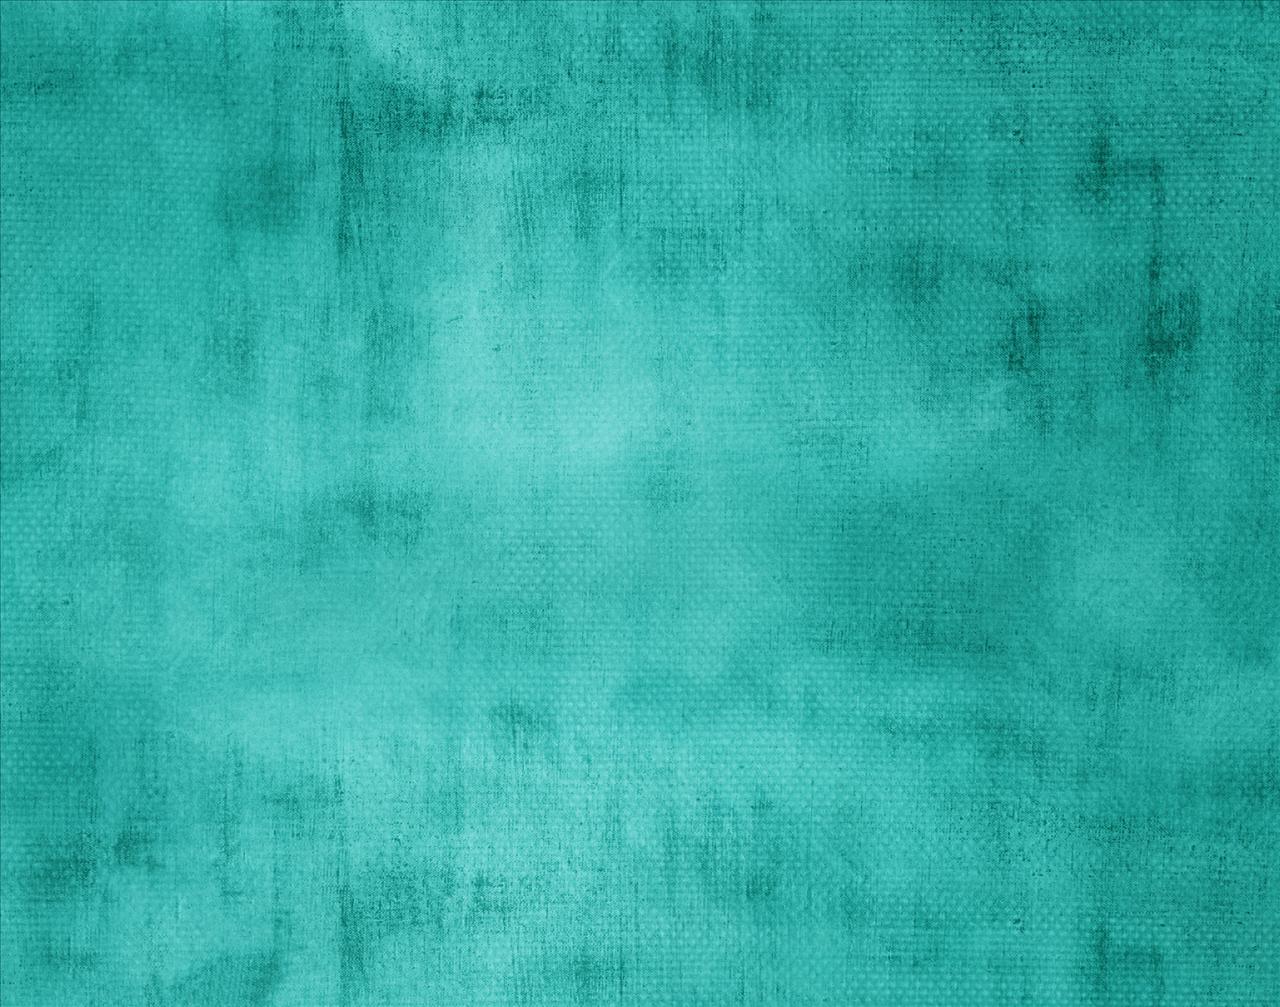 Top Turquoise Black And White Background Image For